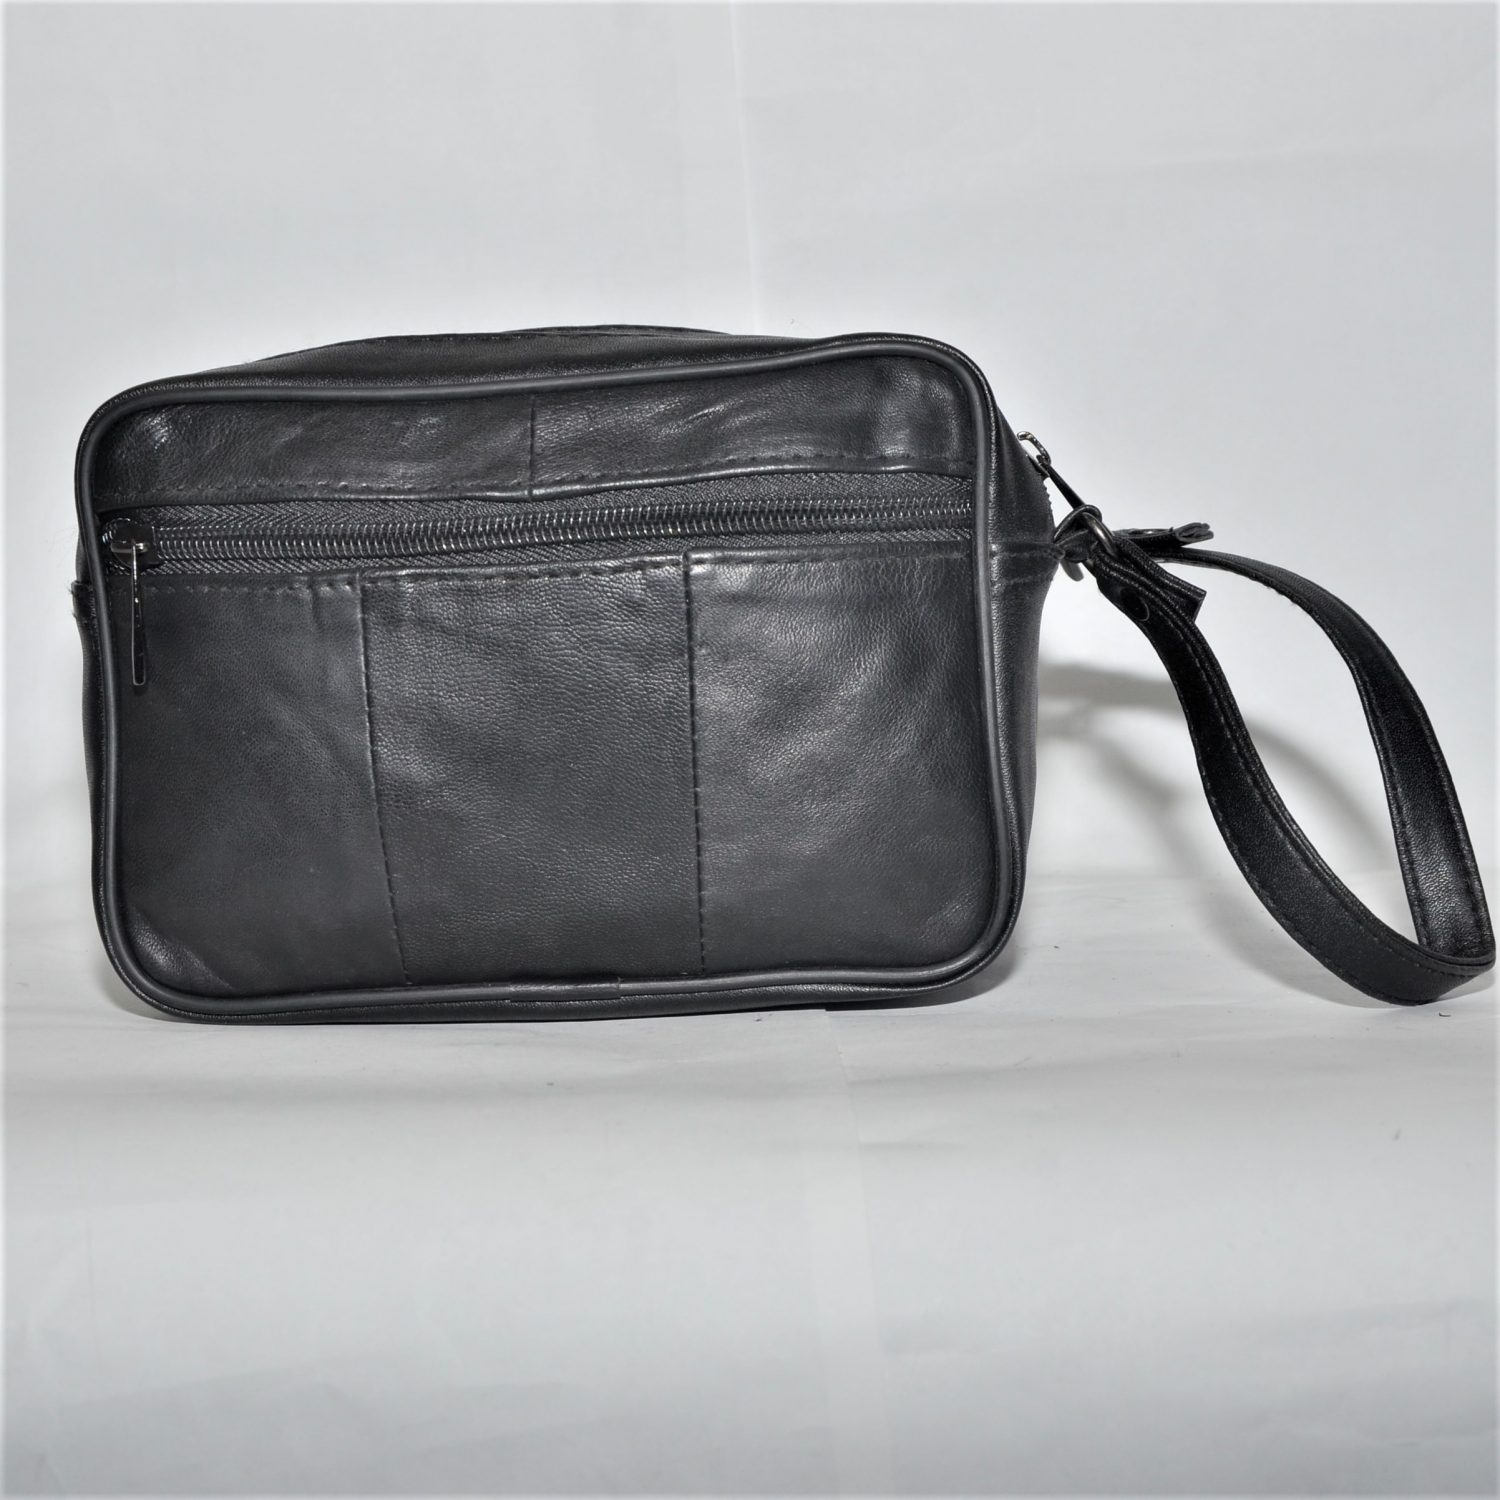 Lorenz Gents Leather Wrist Bag - Style No. 1962 - OJP Products